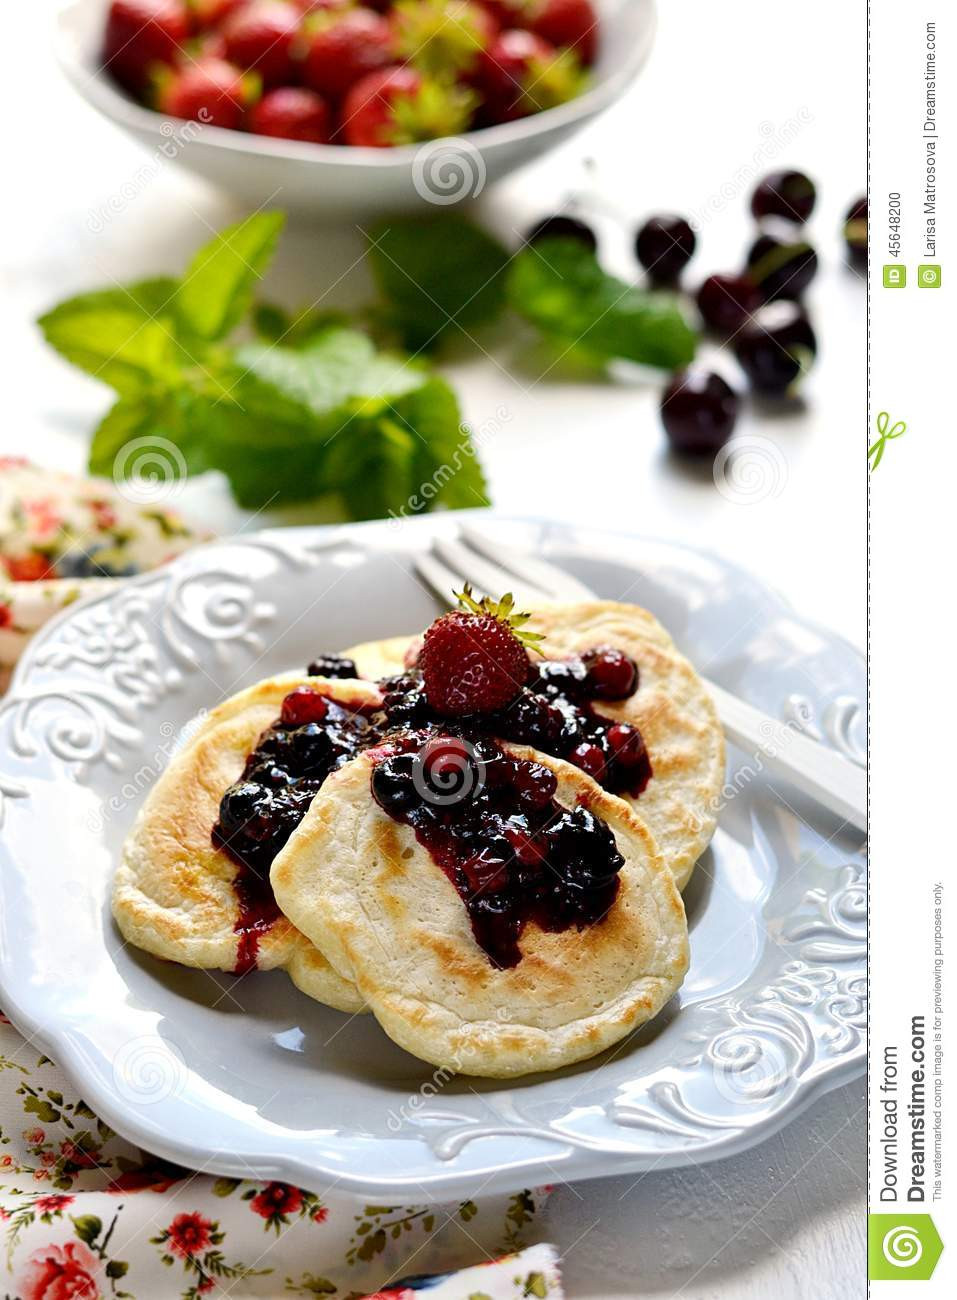 Fruit Topping For Pancakes
 Pancakes With Berry Topping Stock Image